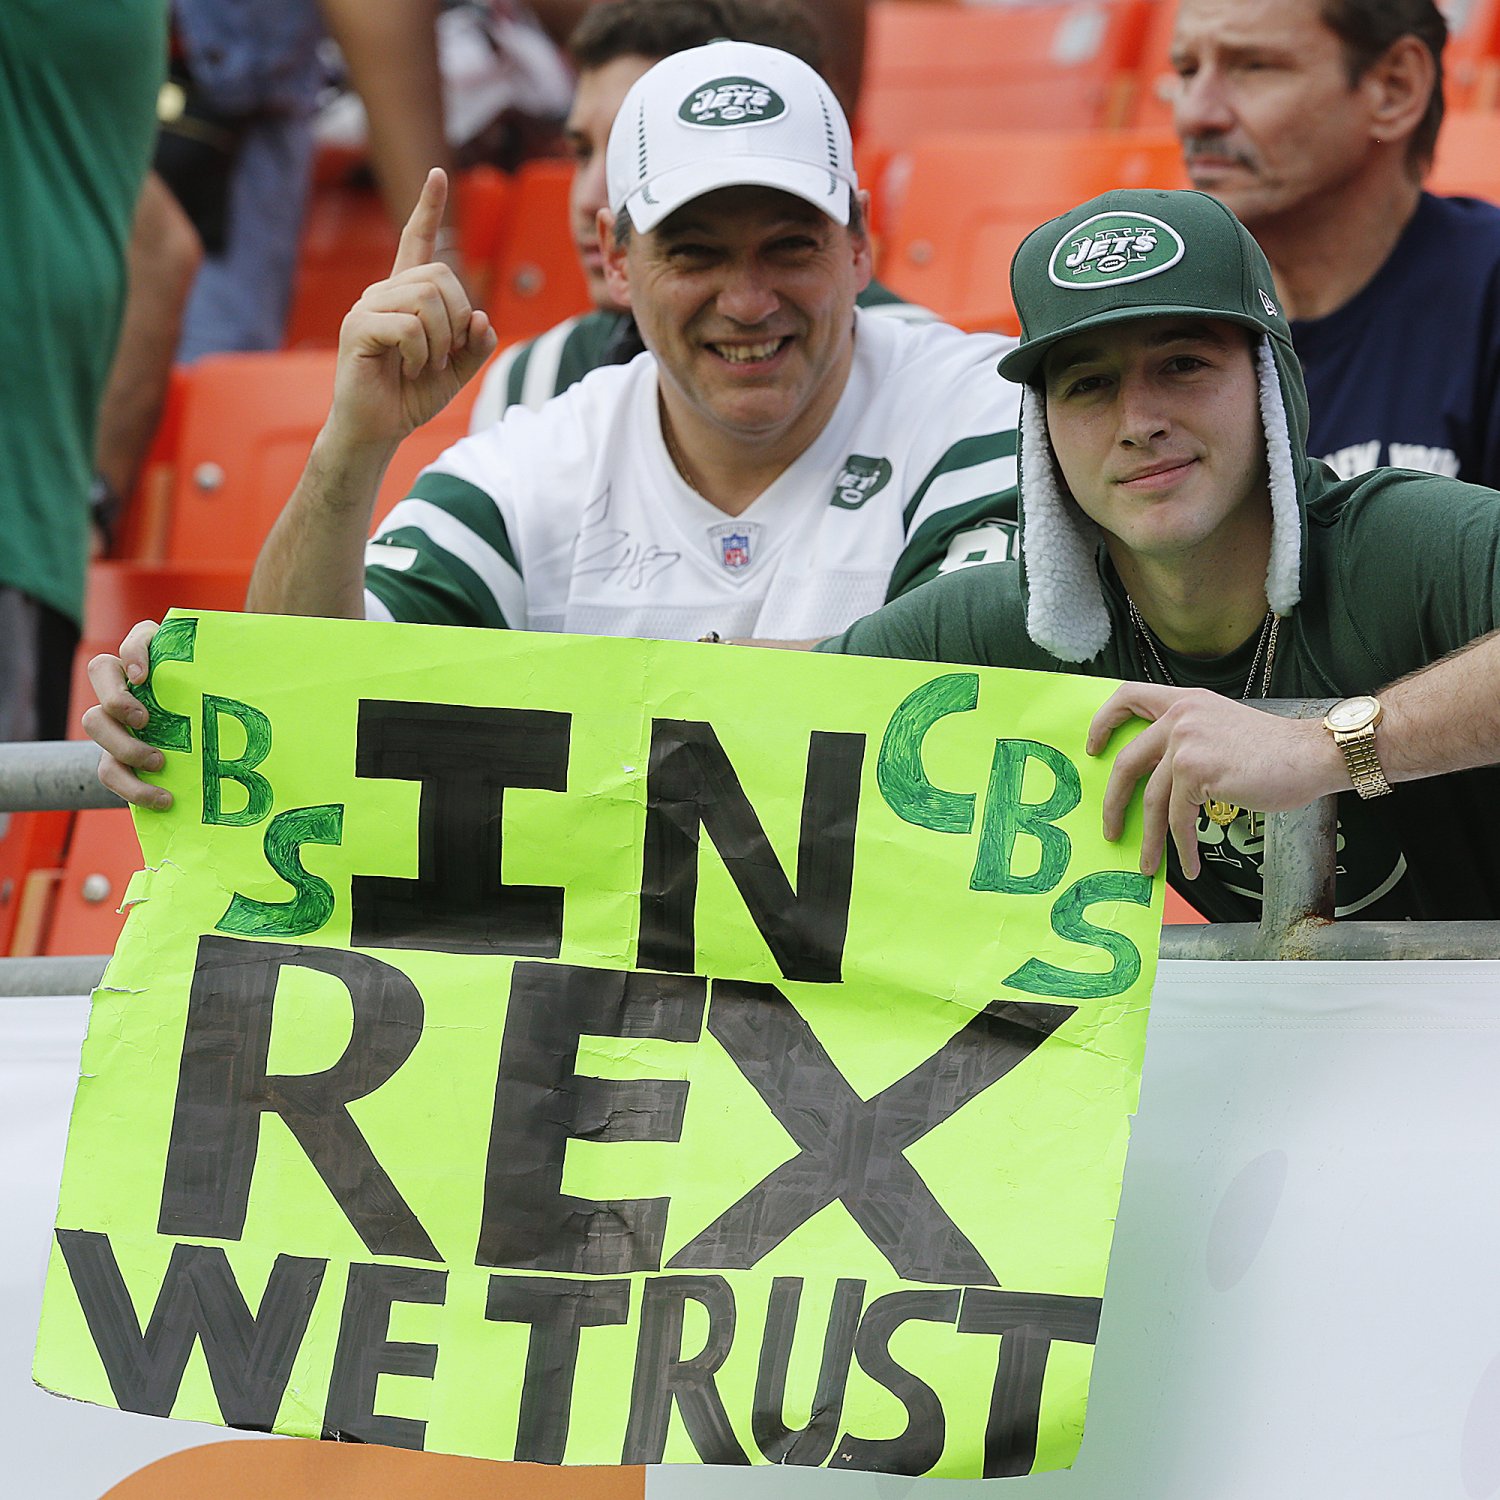 hi-res-459728259-two-new-york-jets-fans-